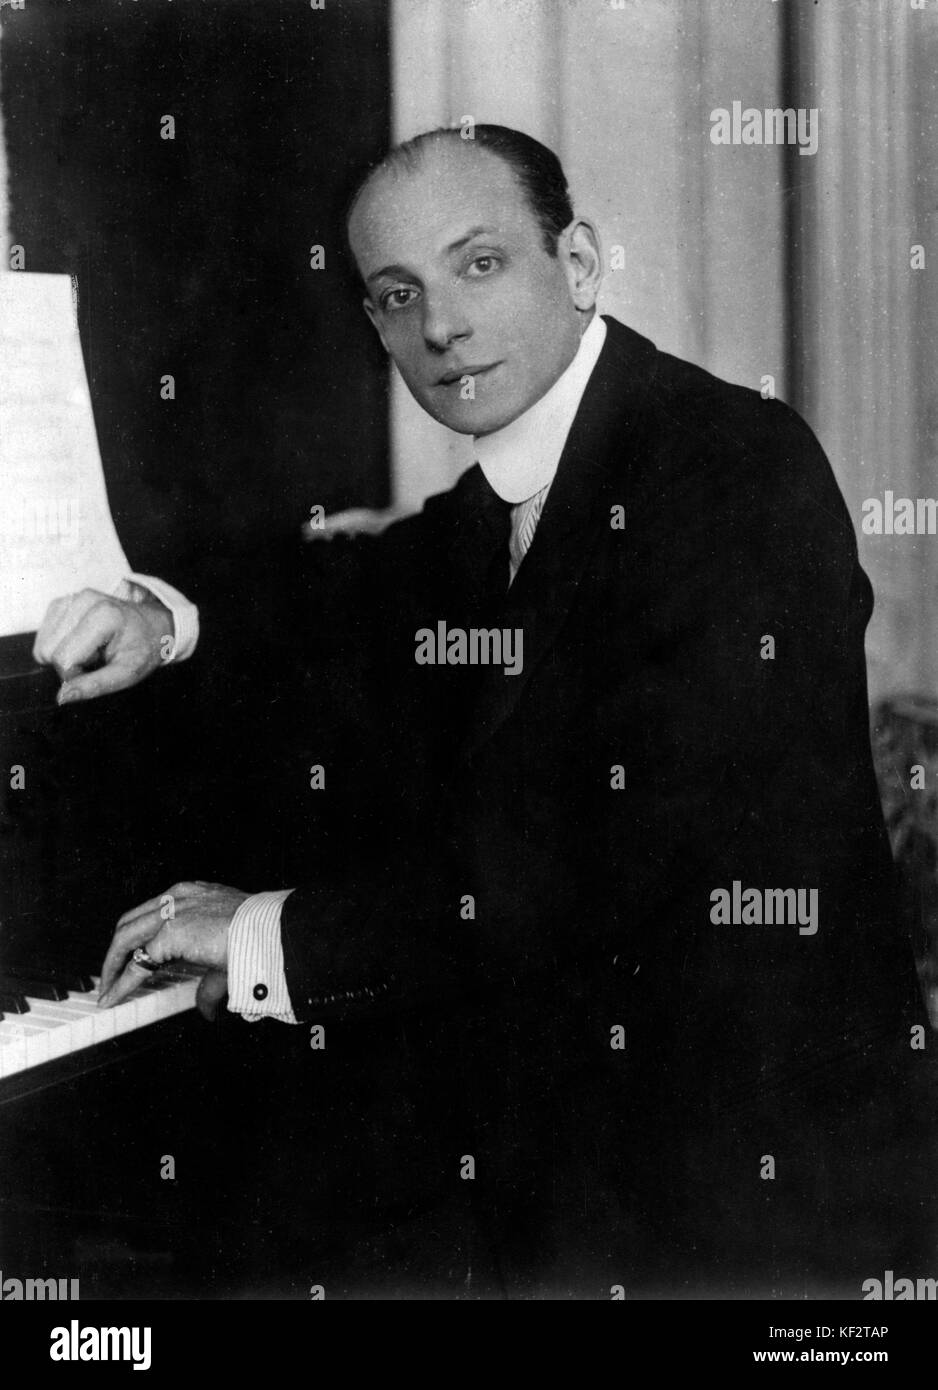 Blair Fairchild at the piano. Published by Max Eschig & Cie 48. BF: American composer and diplomat, 23 June, 1877 - 23 April, 1933. Stock Photo